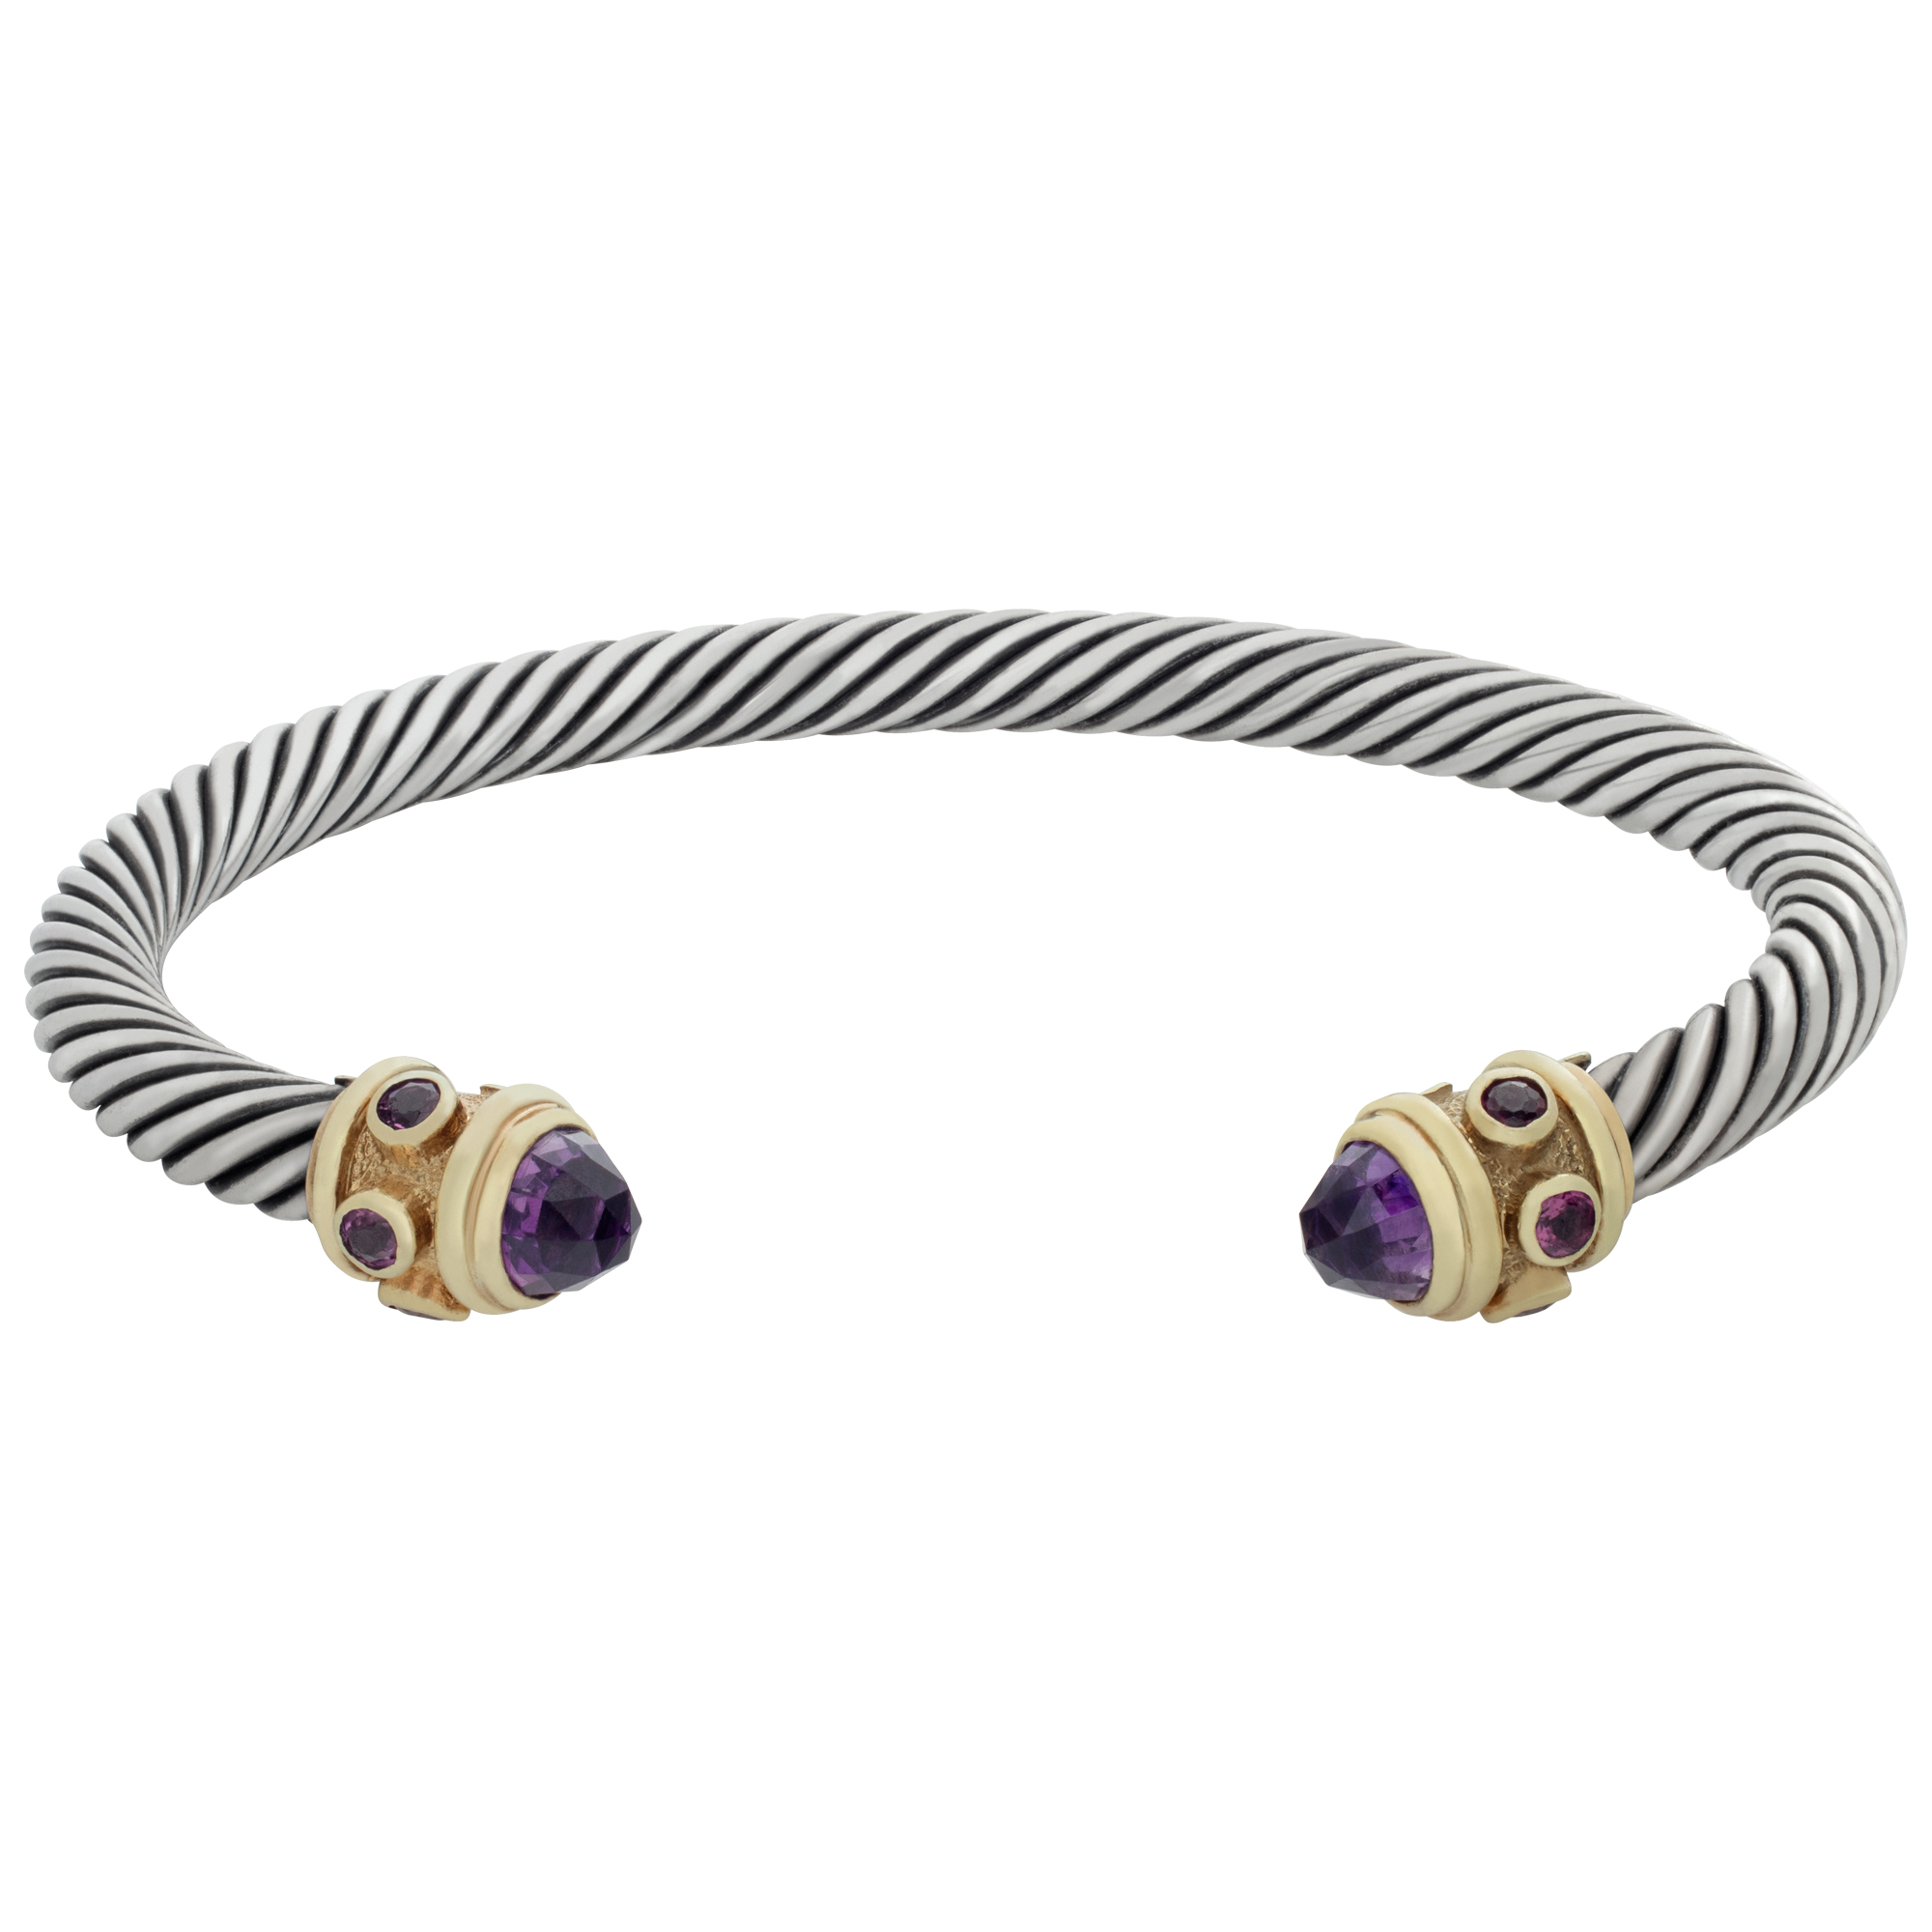 David Yurman Renaissance Cable cuff bangle in 14k & stering silver with amethyst image 1